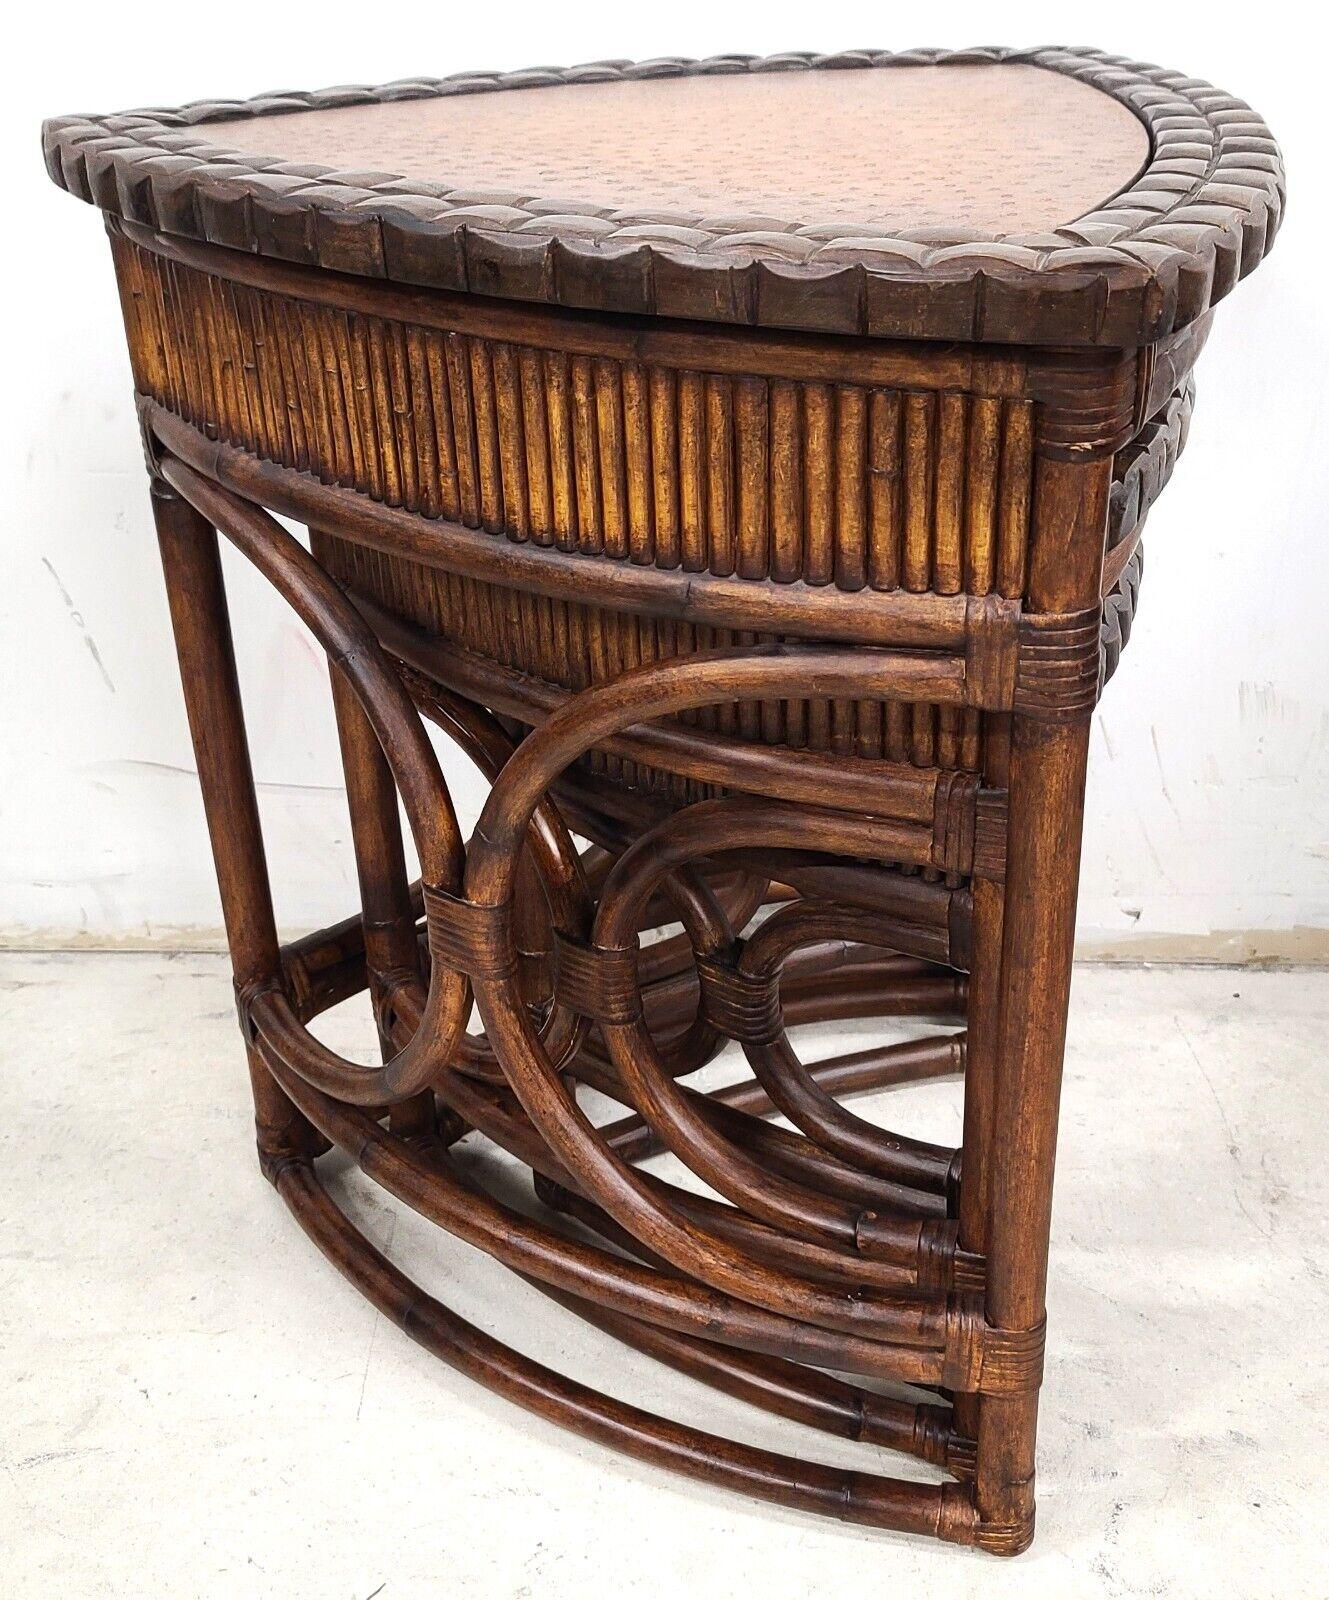 Vintage Bamboo Rattan Coconut Shell Ostrich Nesting Tables, Set of 3 For Sale 6